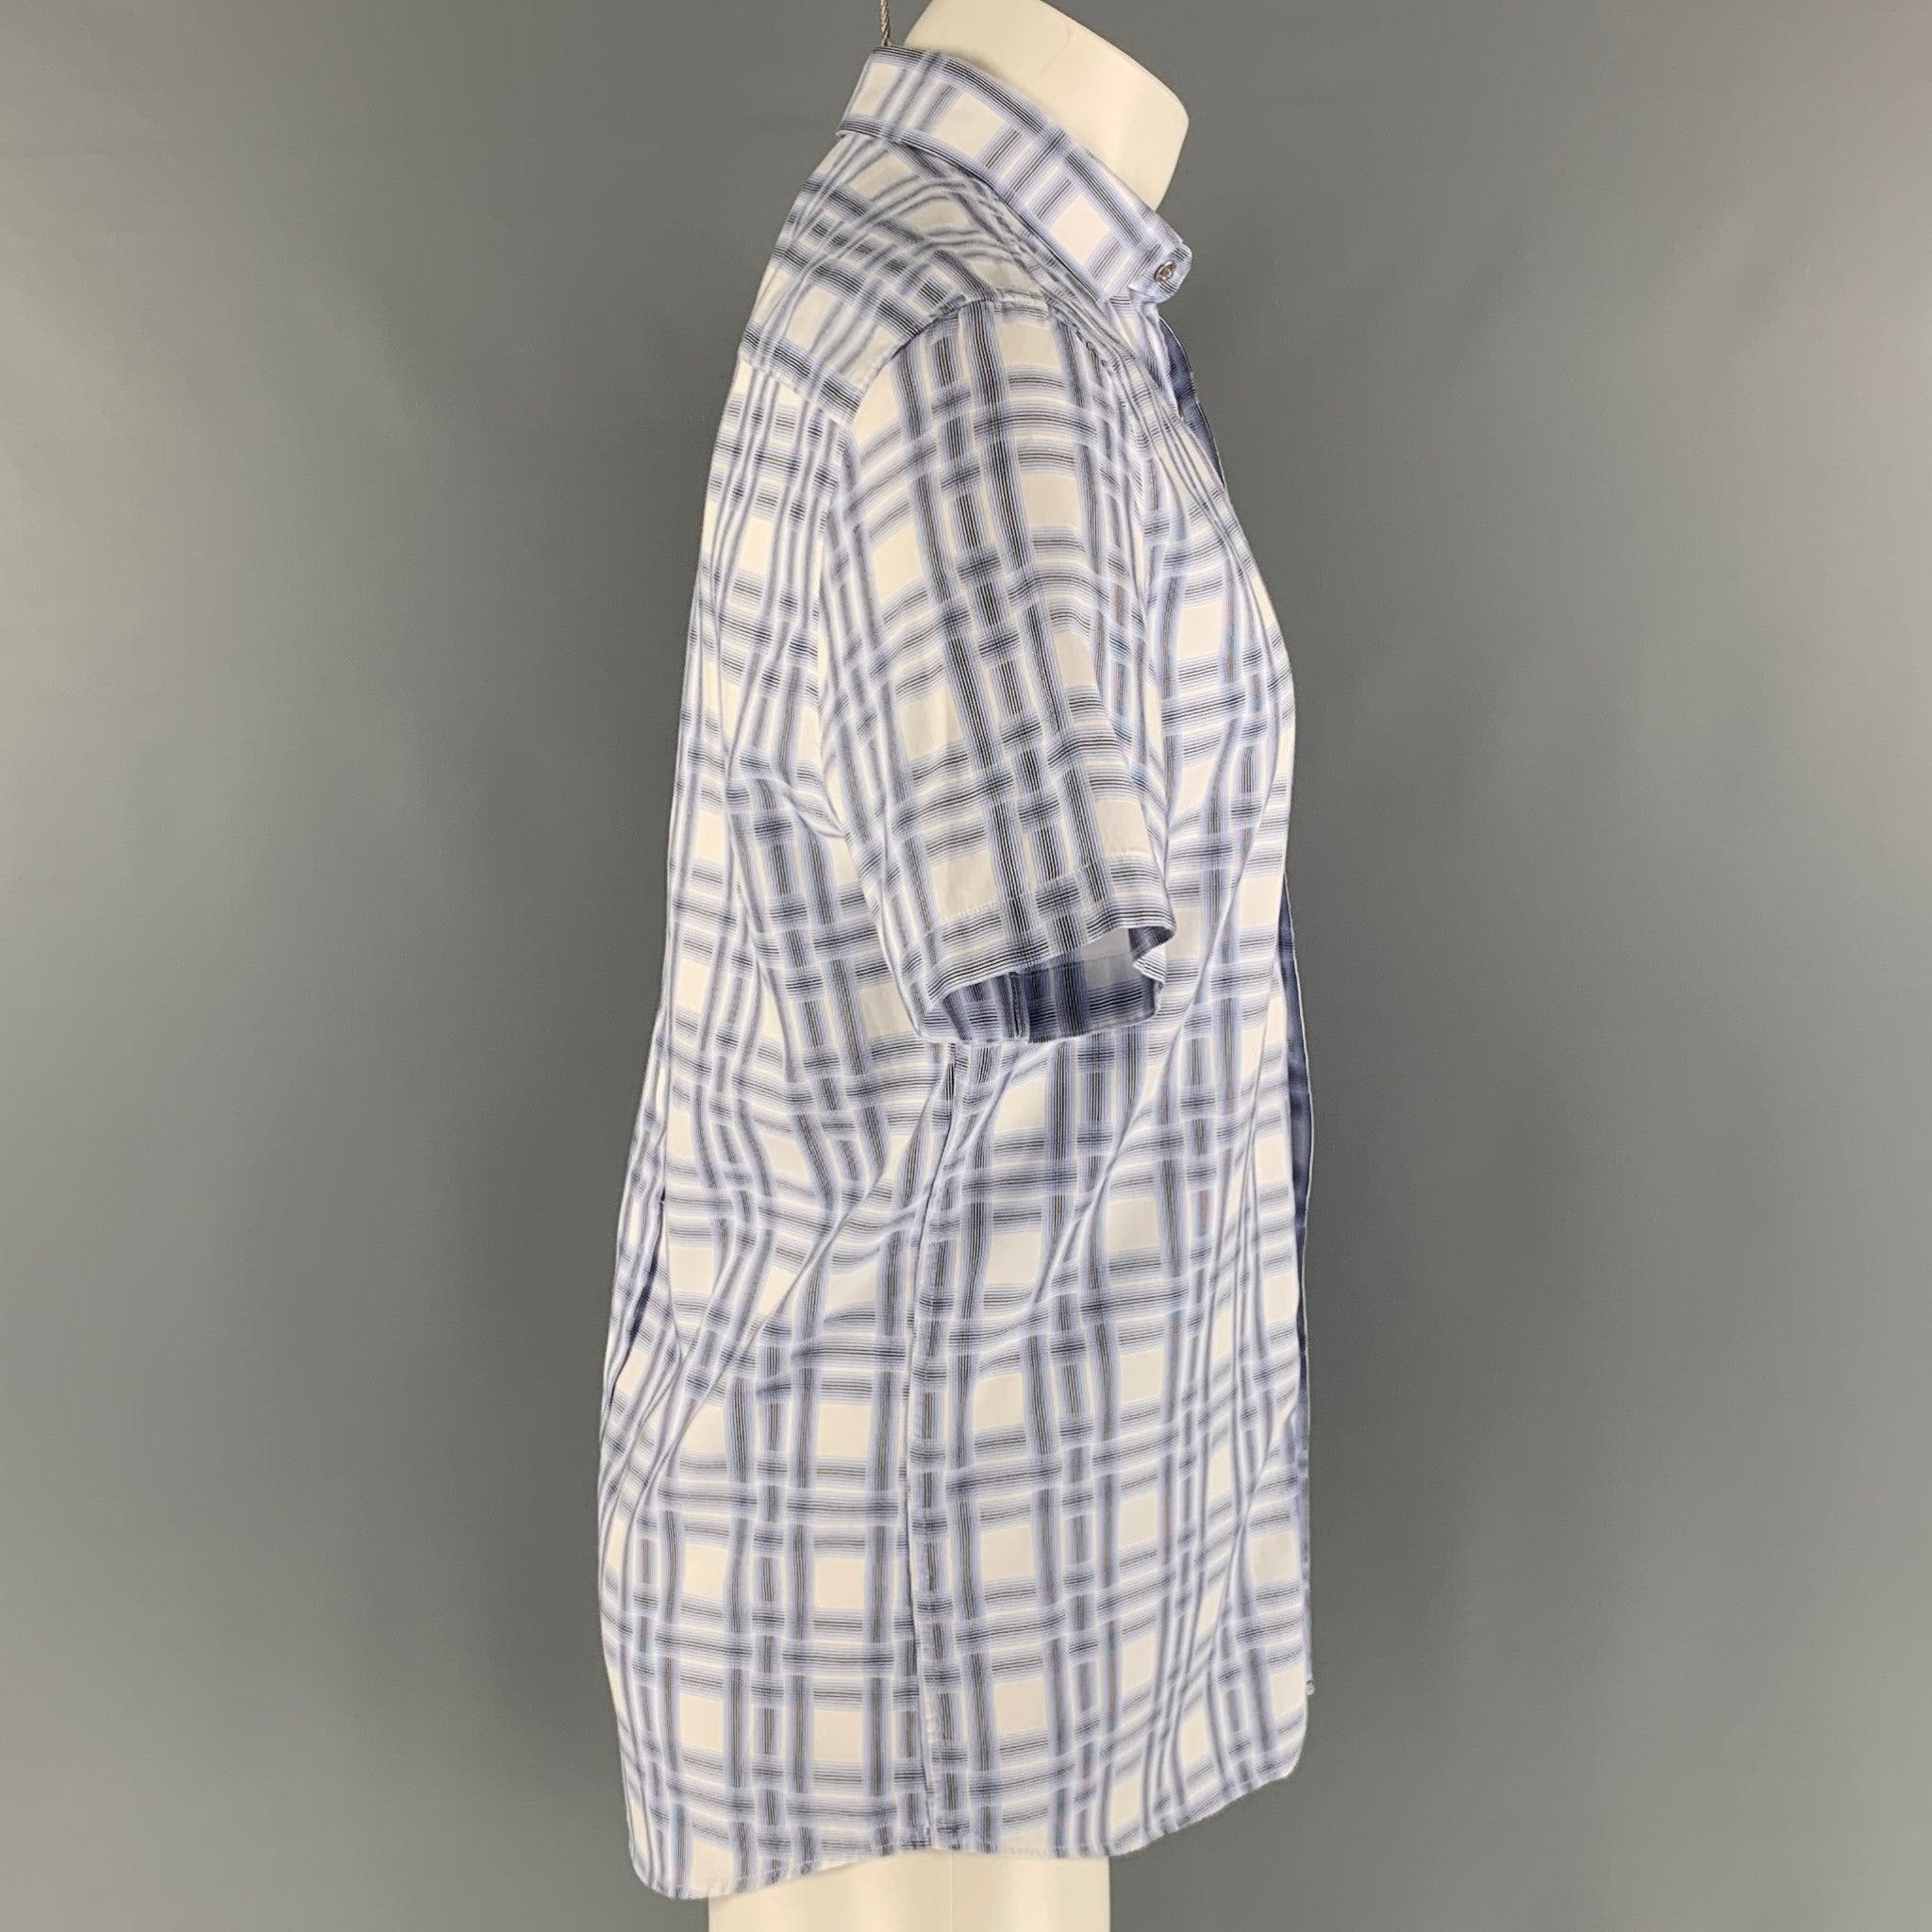 KARL LAGERFELD short sleeve shirt comes in a white and blue print cotton woven material featuring a snap button closure. Very Good Pre- Owned Conditions. 

Marked:   M 

Measurements: 
 
Shoulder: 18 inches Chest: 42 inches Sleeve: 9.5 inches